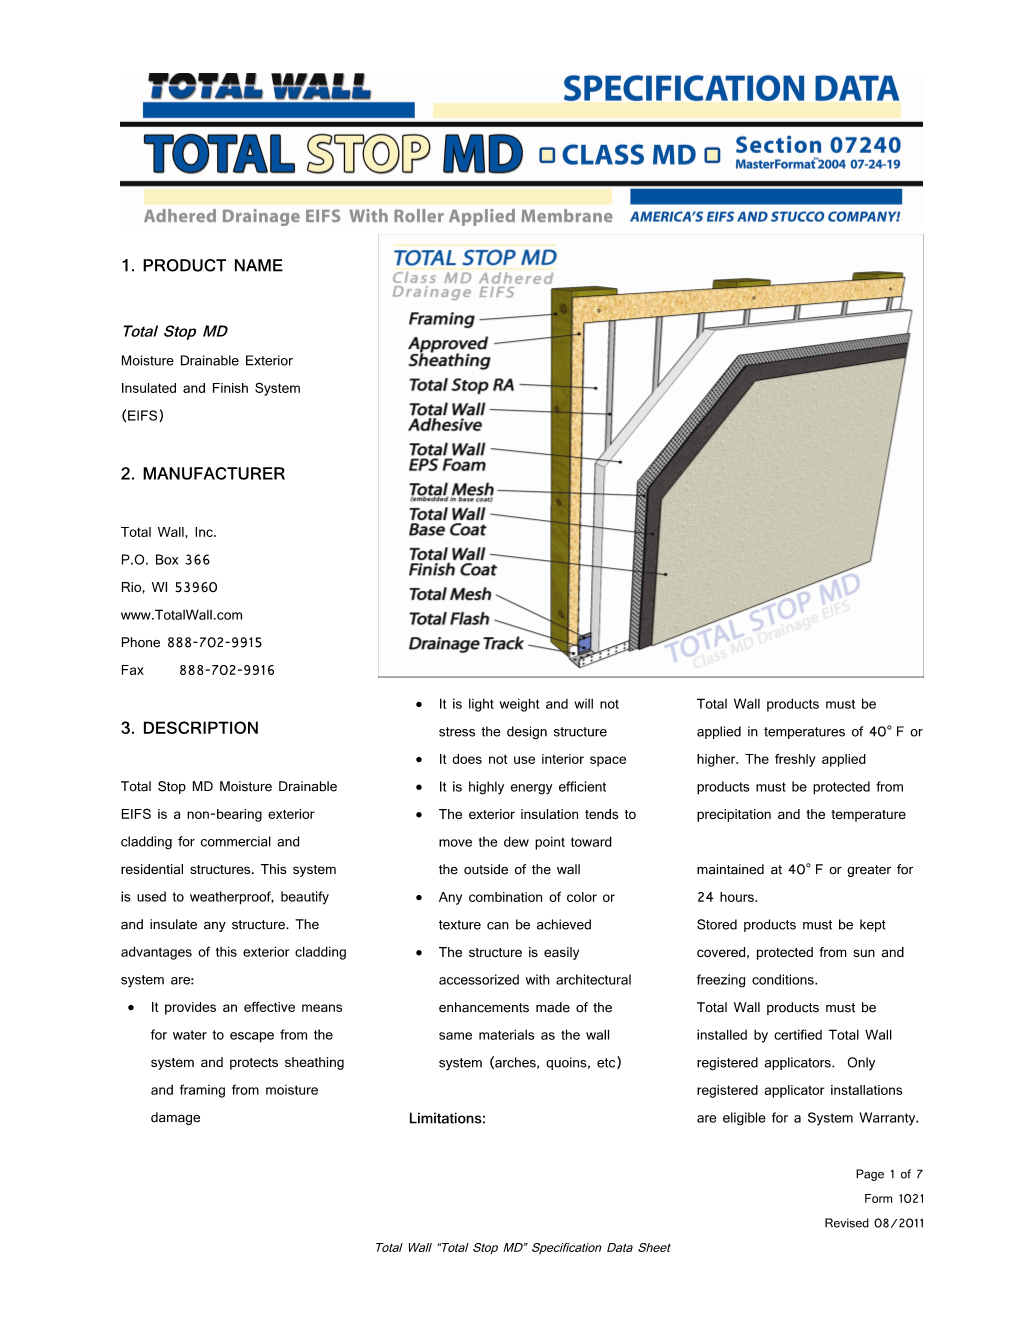 Moisture Drainable Exterior Insulated and Finish System (EIFS)